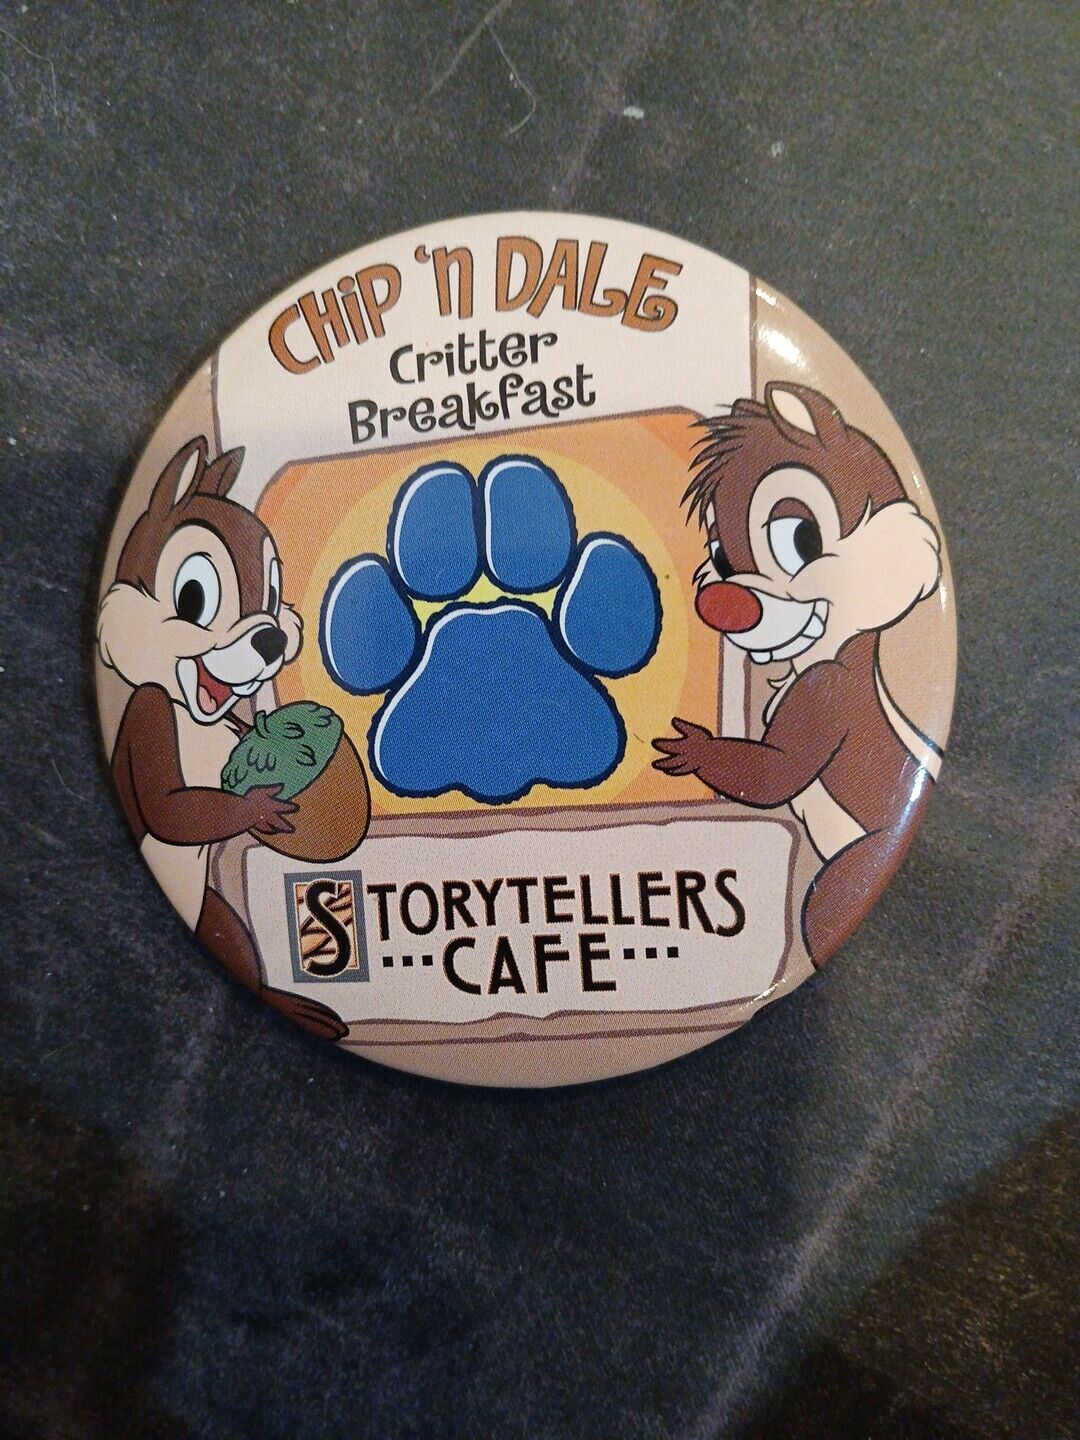 Vintage Disney\'s CHIP \'n DALE Critter Breakfast, Storytellers Cafe, Button Pin